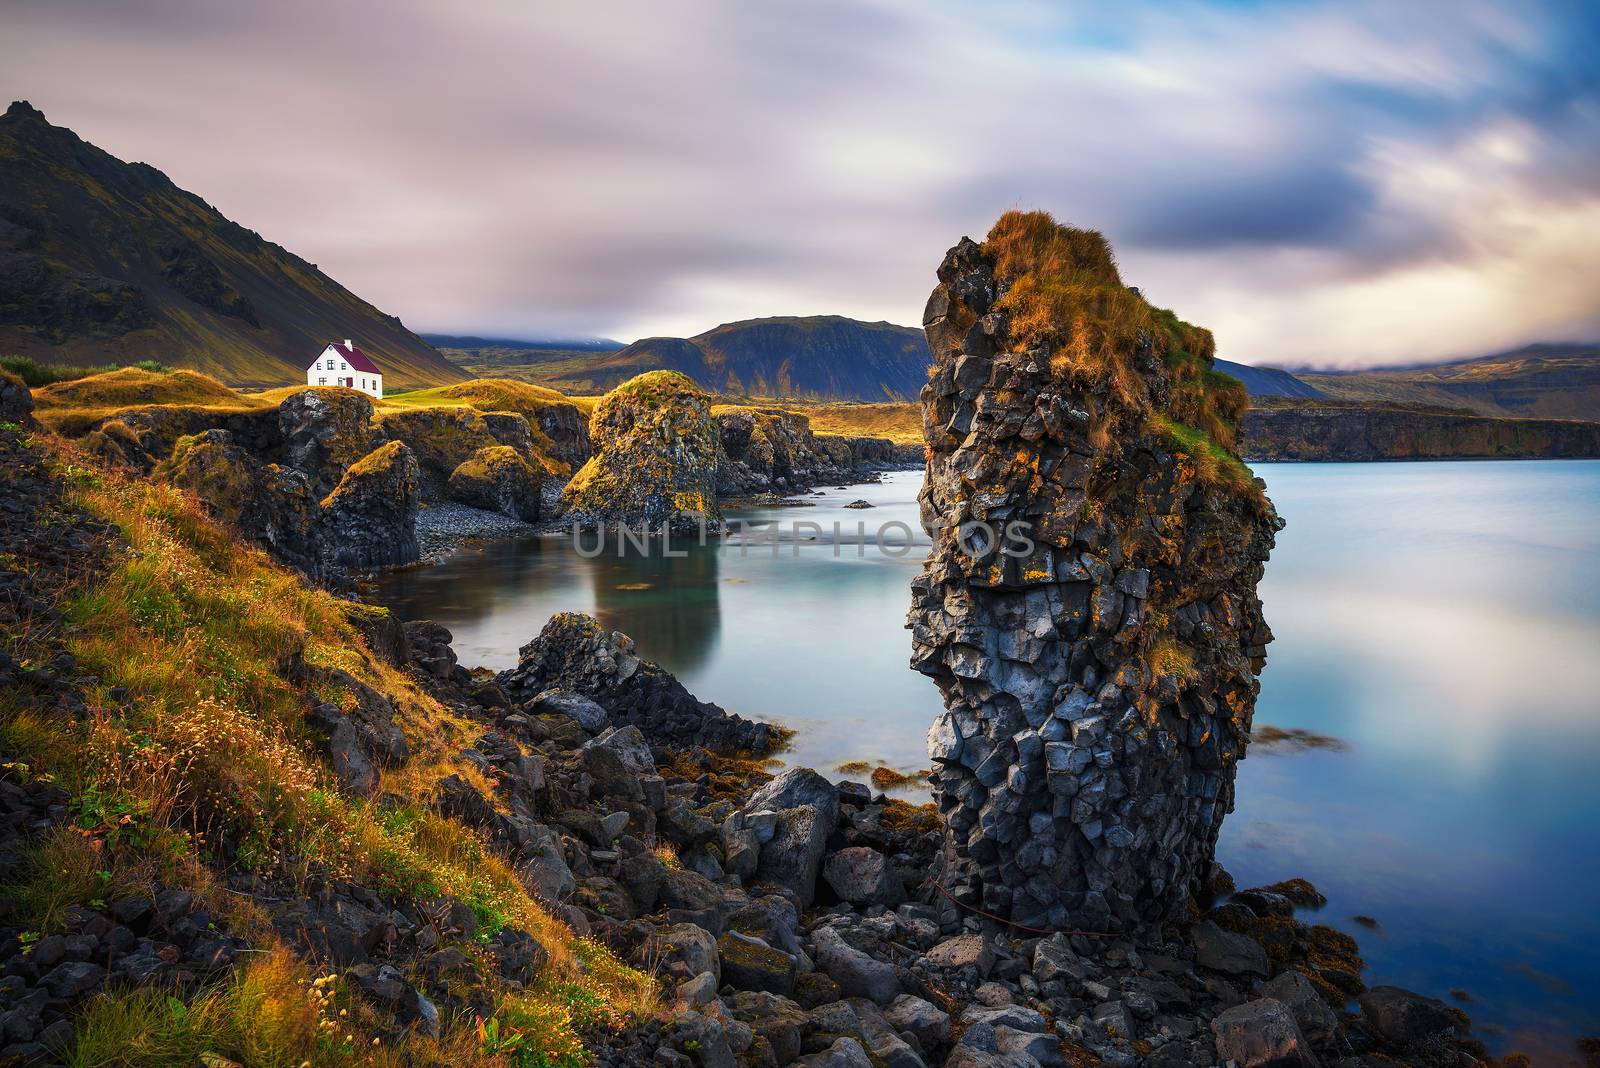 Sea shore in Iceland with cliffs and a small house in the village of Arnarstapi by nickfox